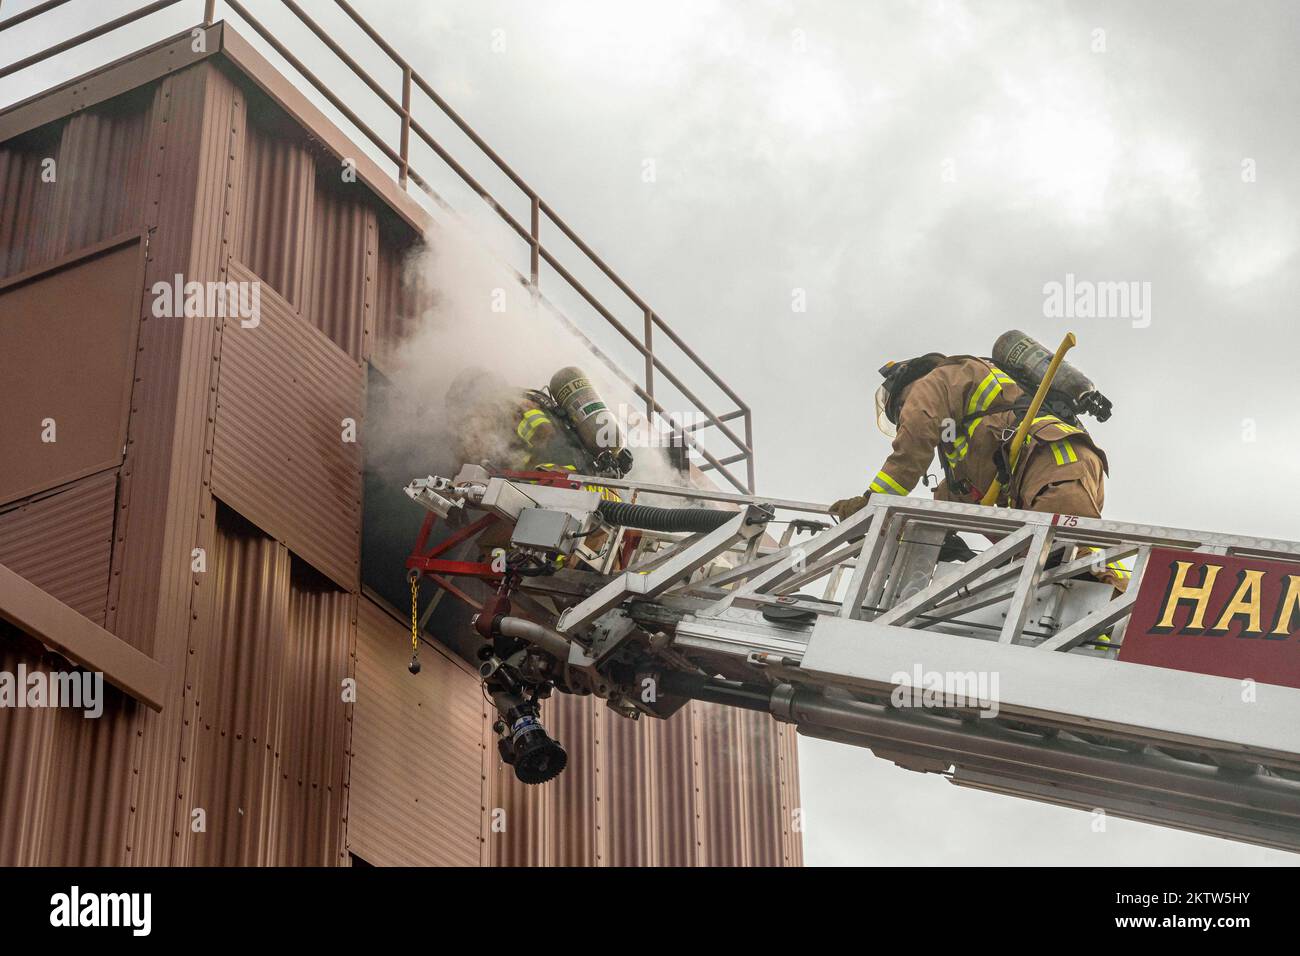 Hampton, Virginia, USA. 16th Nov, 2022. U.S. Air Force Senior Airman Brandon Franklin, 633d Civil Engineer Squadron firefighter, left, and Master Sgt. Kyle Nelson, 142d Civil Engineer Squadron Air National Guard firefighter, ascend Ladder 4 to rescue a simulated victim during a rapid intervention team work exercise in the burn building at Joint Base Langley-Eustis, Virginia, November. 17, 2022. The Ladder 4 truck has the capability to extend up to 75 feet to rescue victims at various heights. Credit: U.S. Air Force/ZUMA Press Wire Service/ZUMAPRESS.com/Alamy Live News Stock Photo